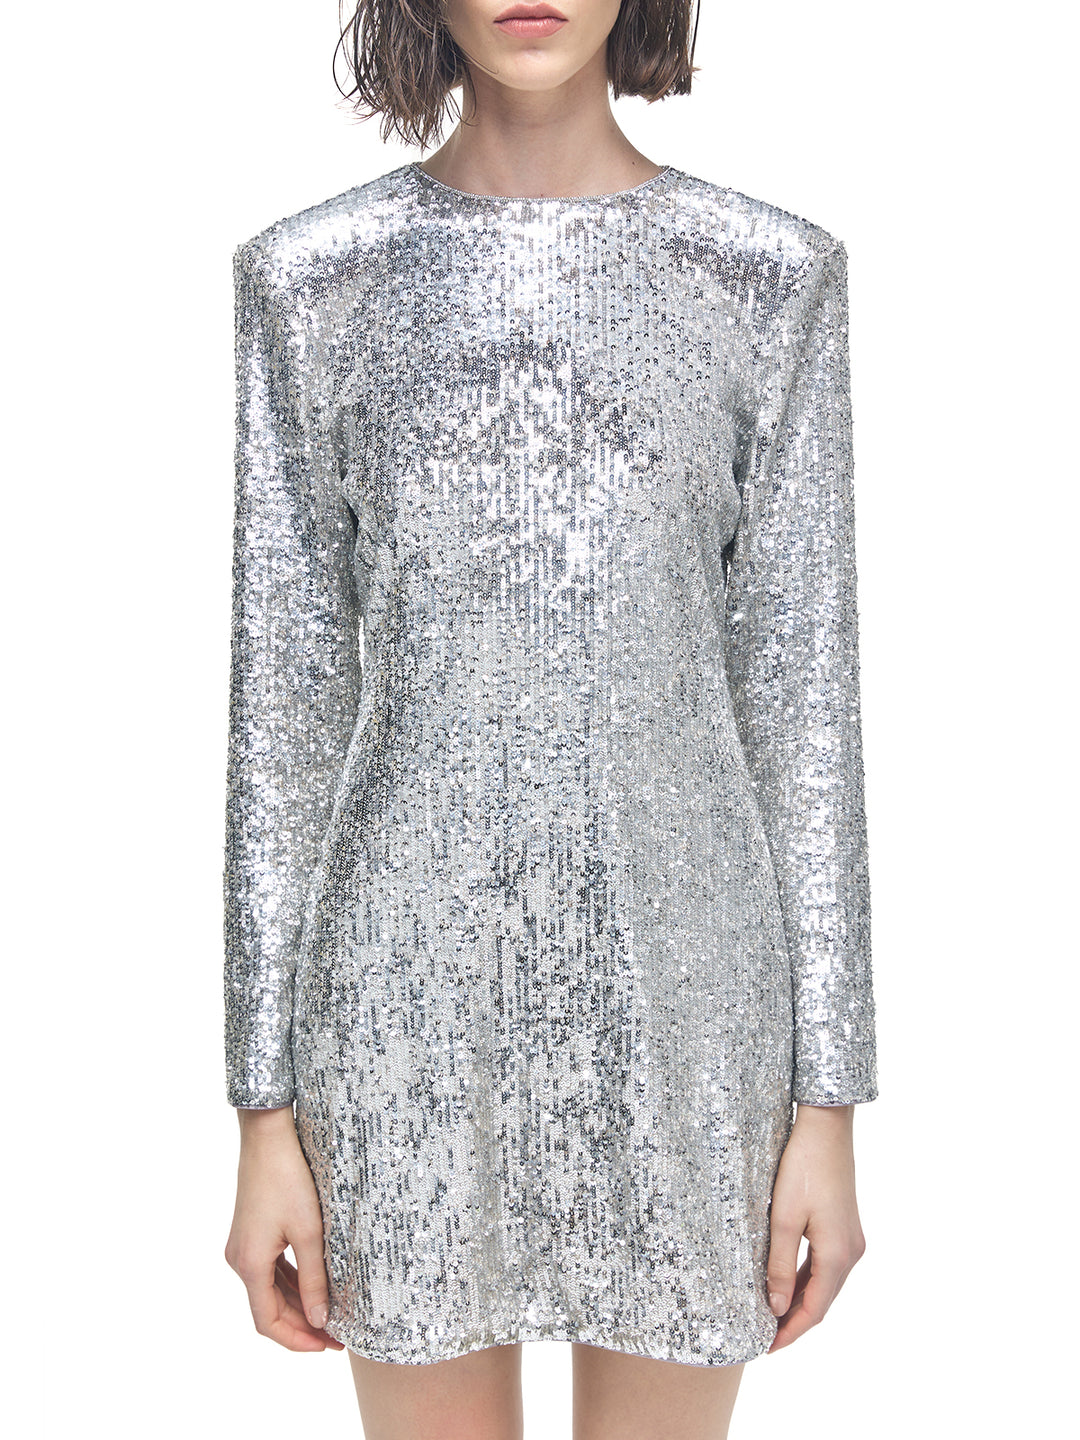 Three-dimensional Layered Sequined Backless Mini Dress